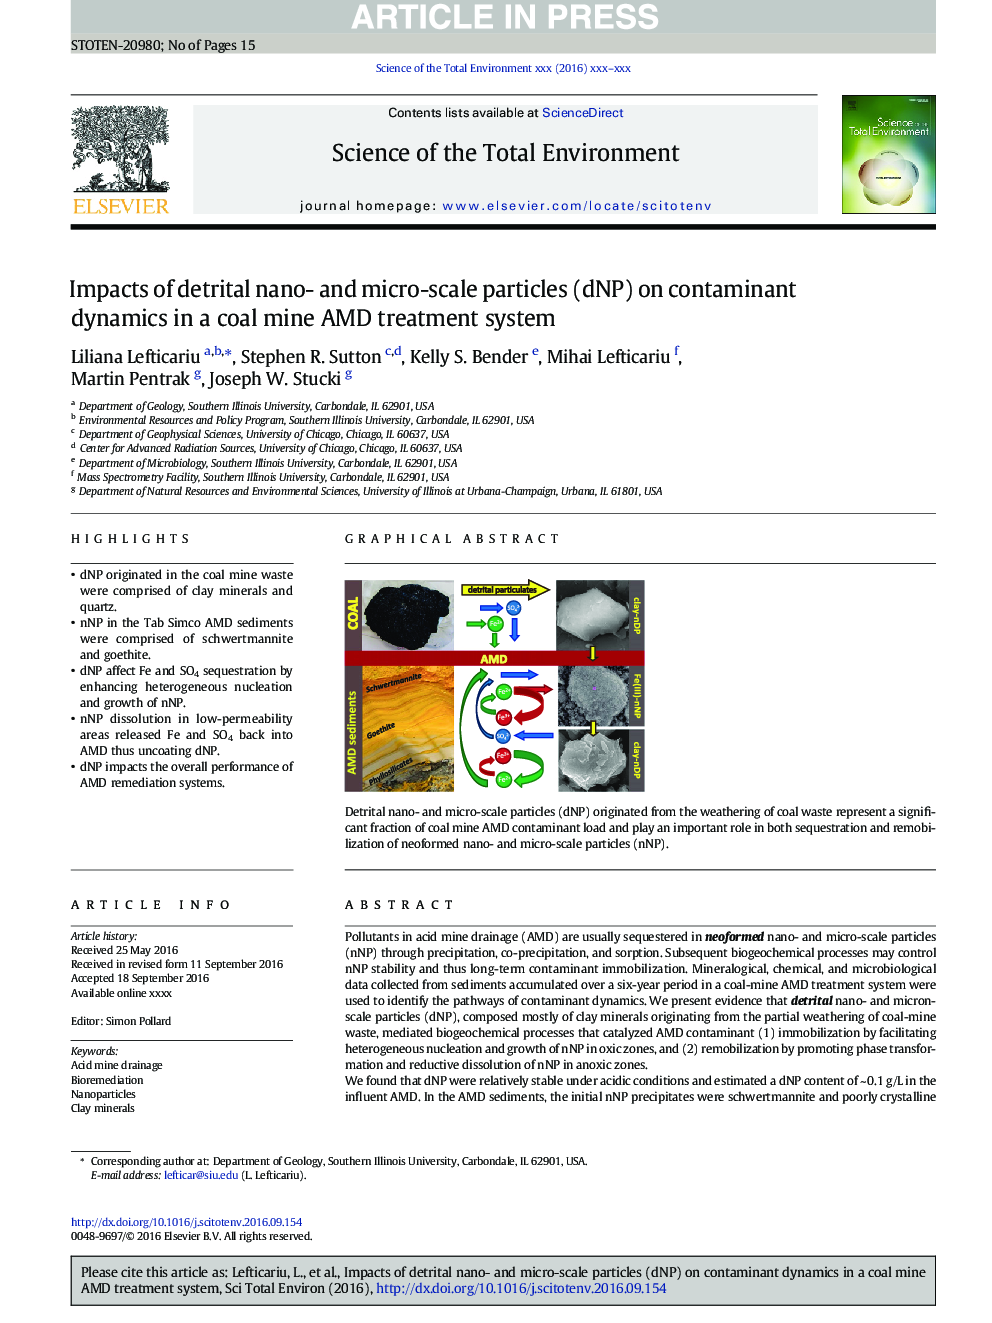 Impacts of detrital nano- and micro-scale particles (dNP) on contaminant dynamics in a coal mine AMD treatment system